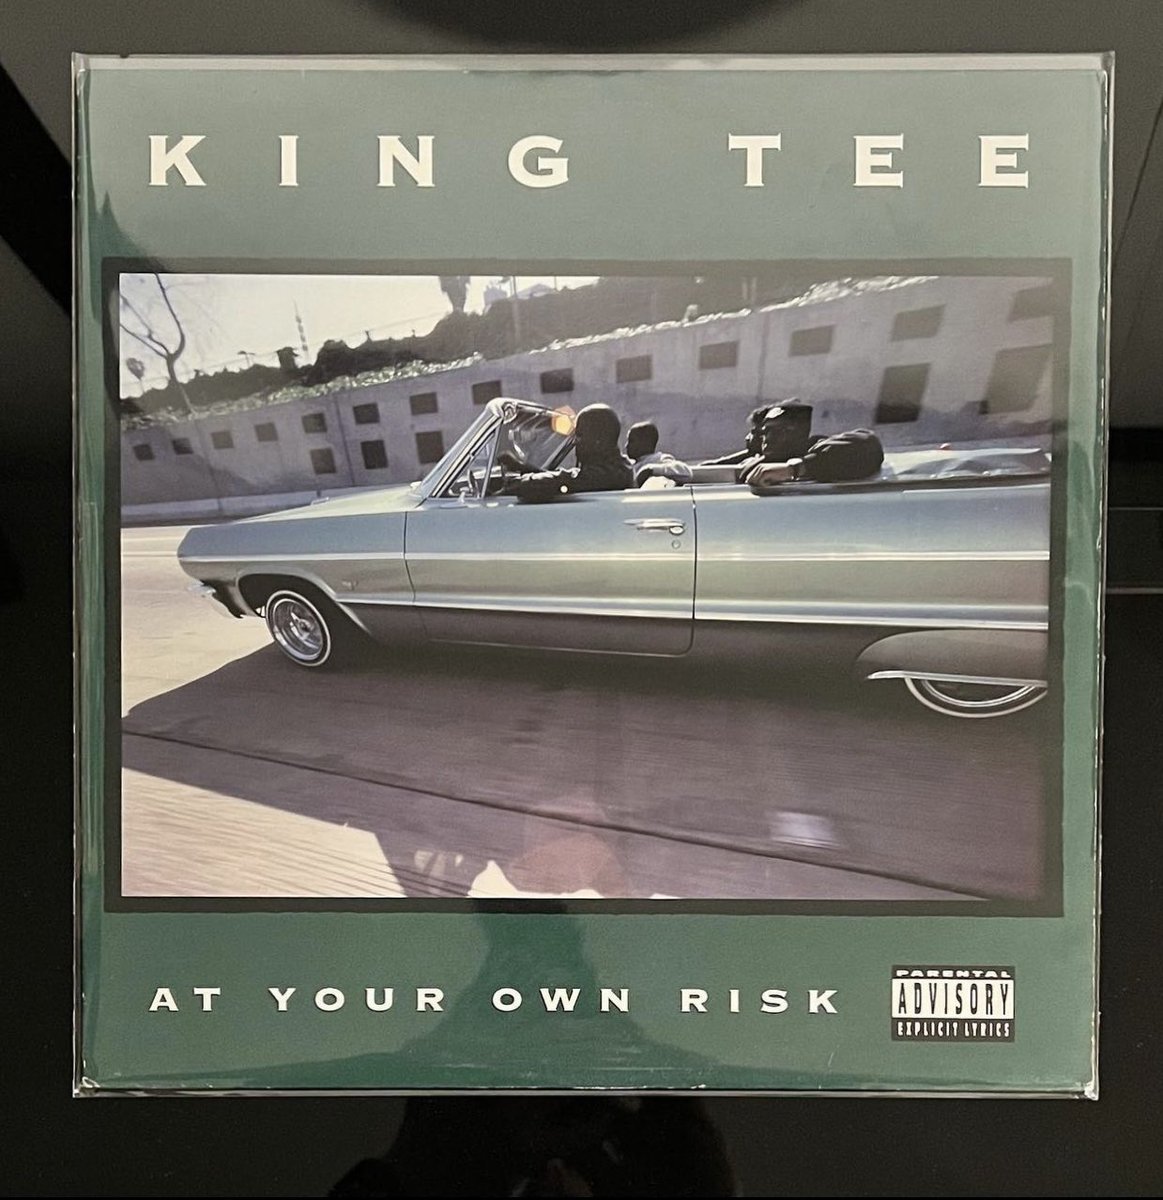 King Tee “At Your Own Risk” 1990 Original U.S Press Released 33 years ago today